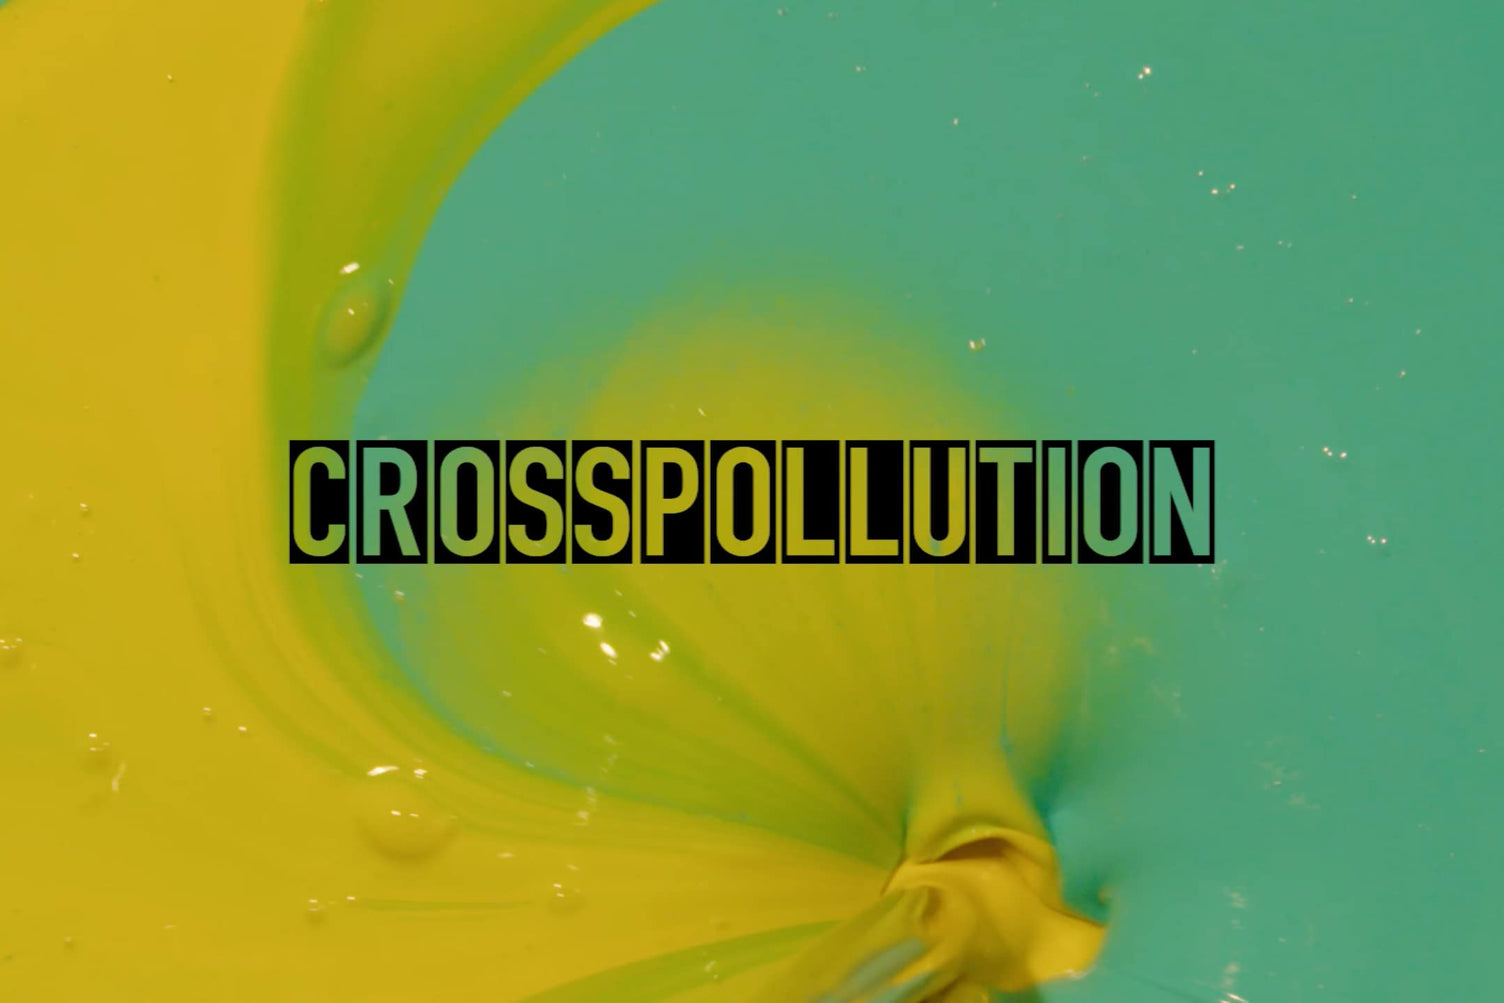 CROSSPOLLUTION 2: #CP2OUR